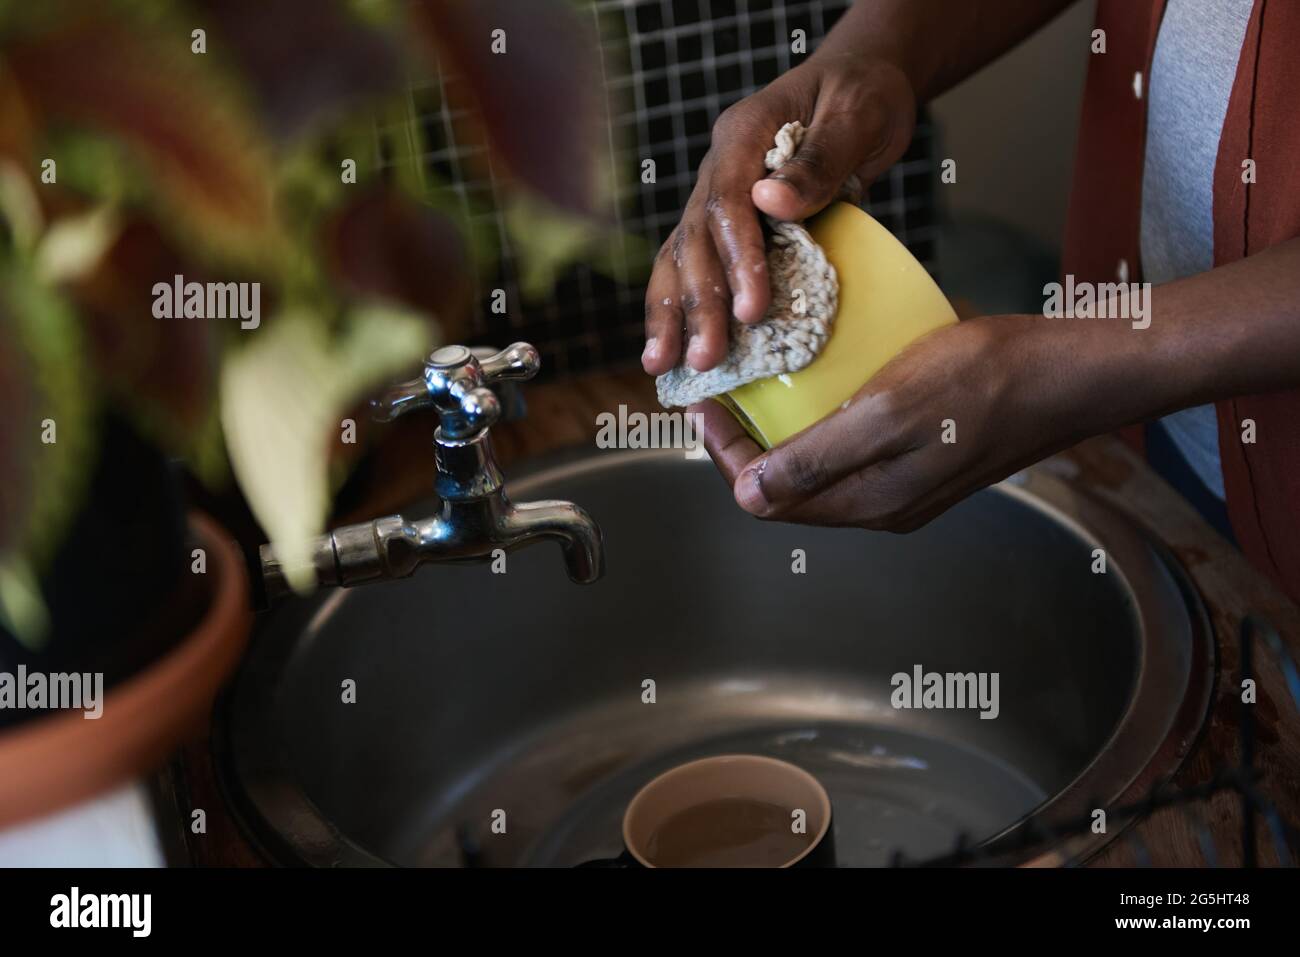 African man washing some dishes in his kitchen sink Stock Photo